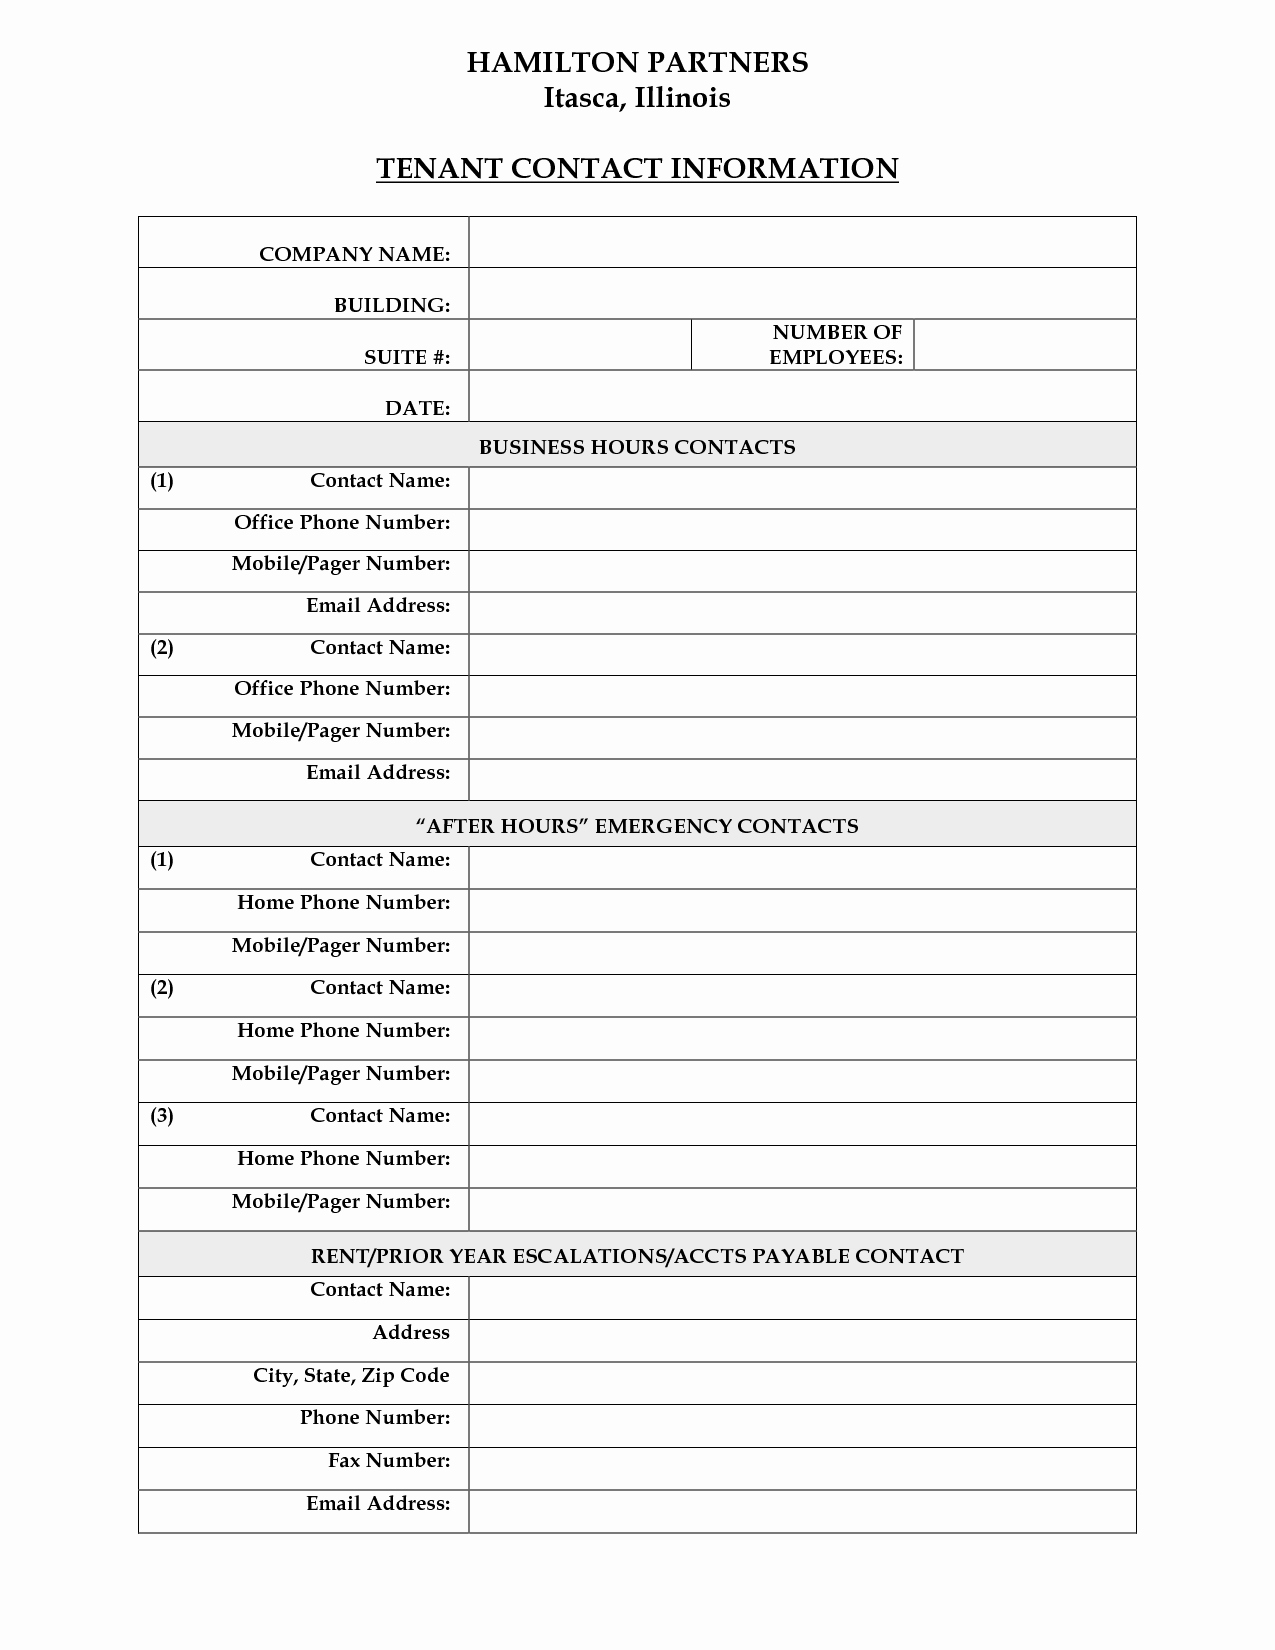 Emergency Contact form Template Free Best Of Best S Of Tenant Contact Information form Template